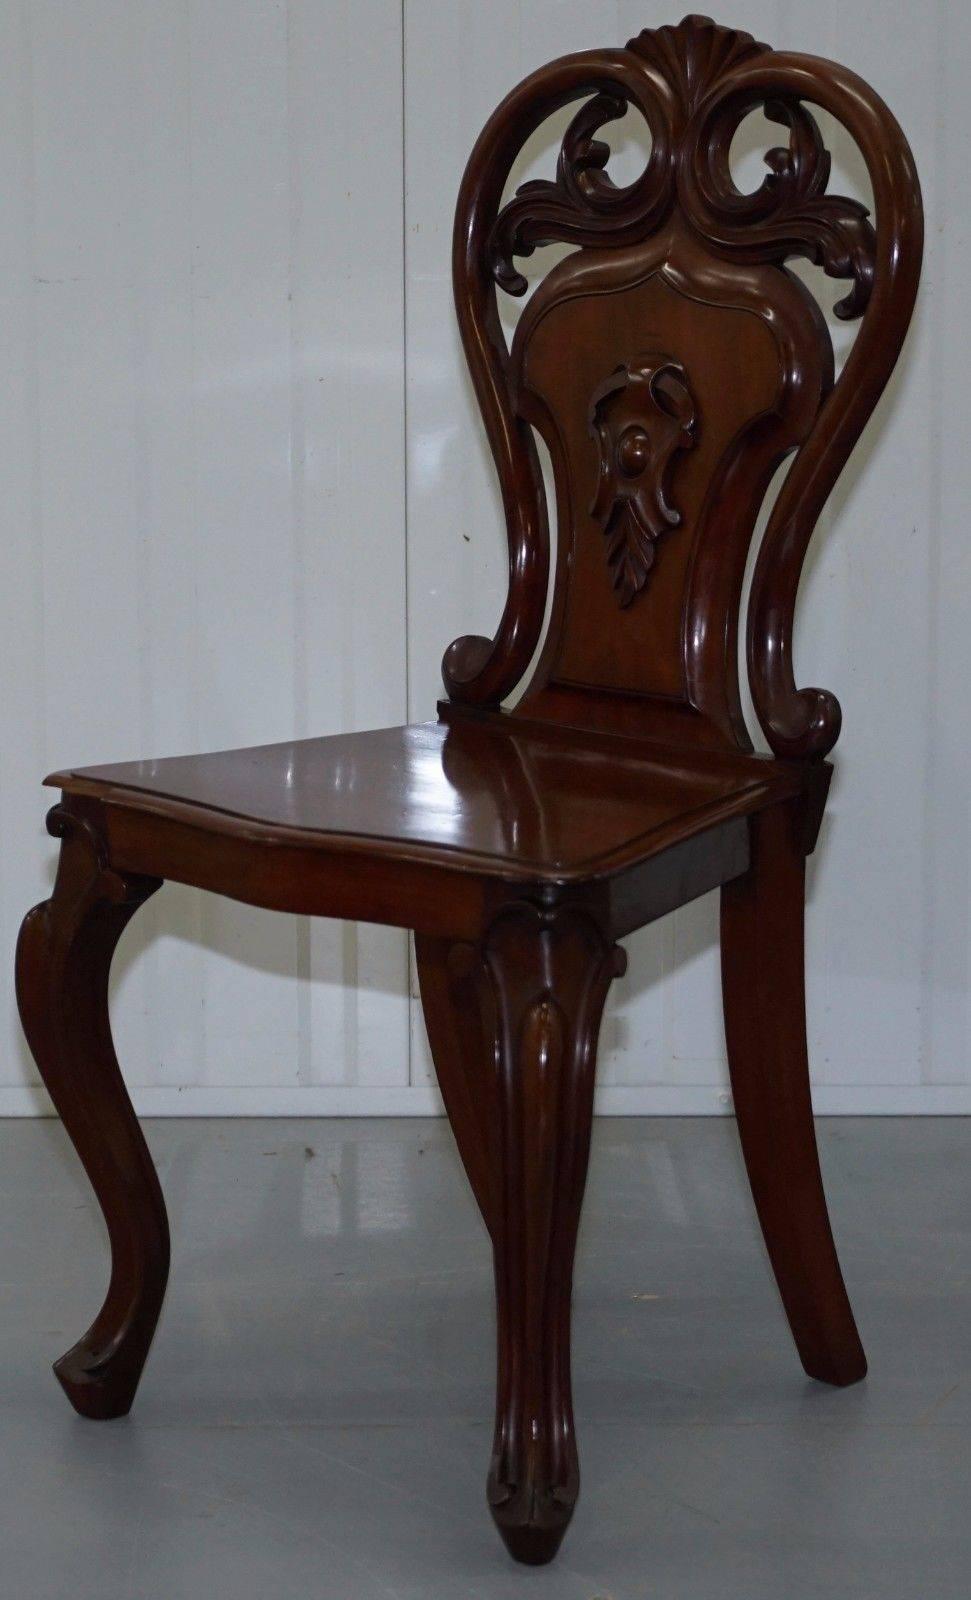 British Pair of Rare 1870 Victorian Hand-Carved Shield Backed Solid Mahogany Hall Chairs